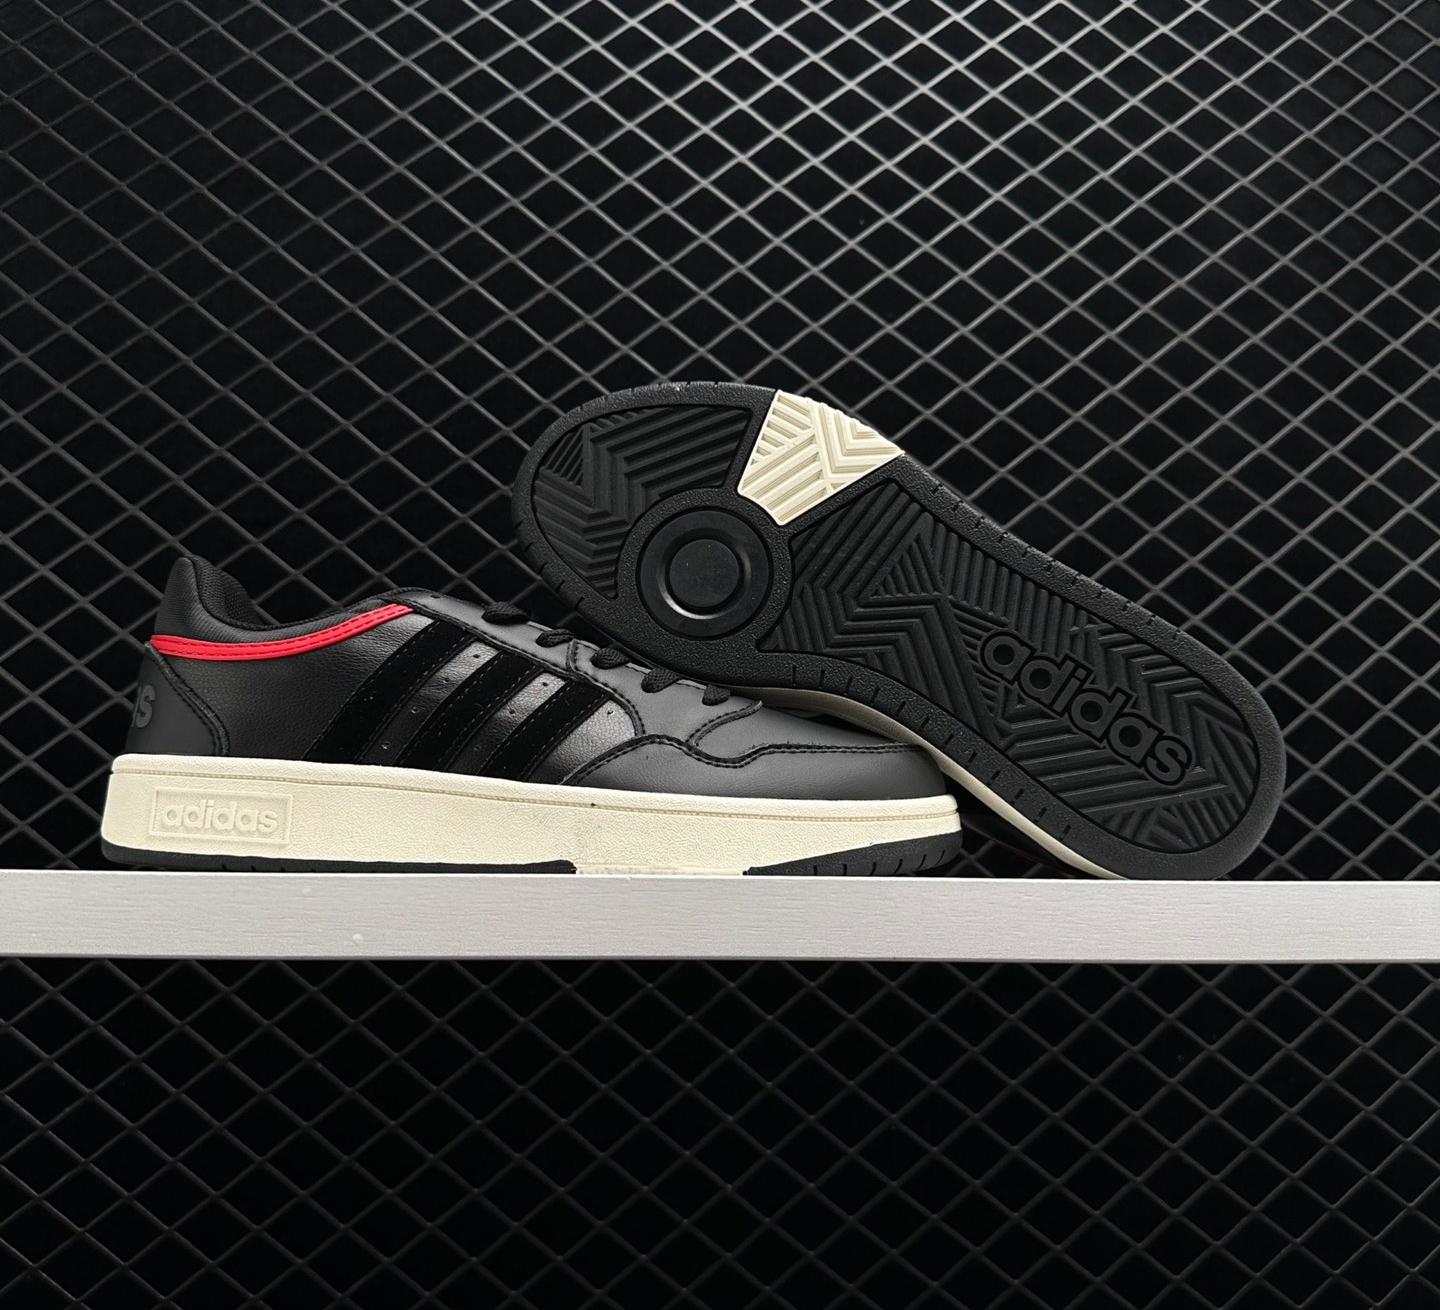 Adidas Neo Hoops 3.0 Black GZ1347: Durable Low Tops for Casual Skateboarding